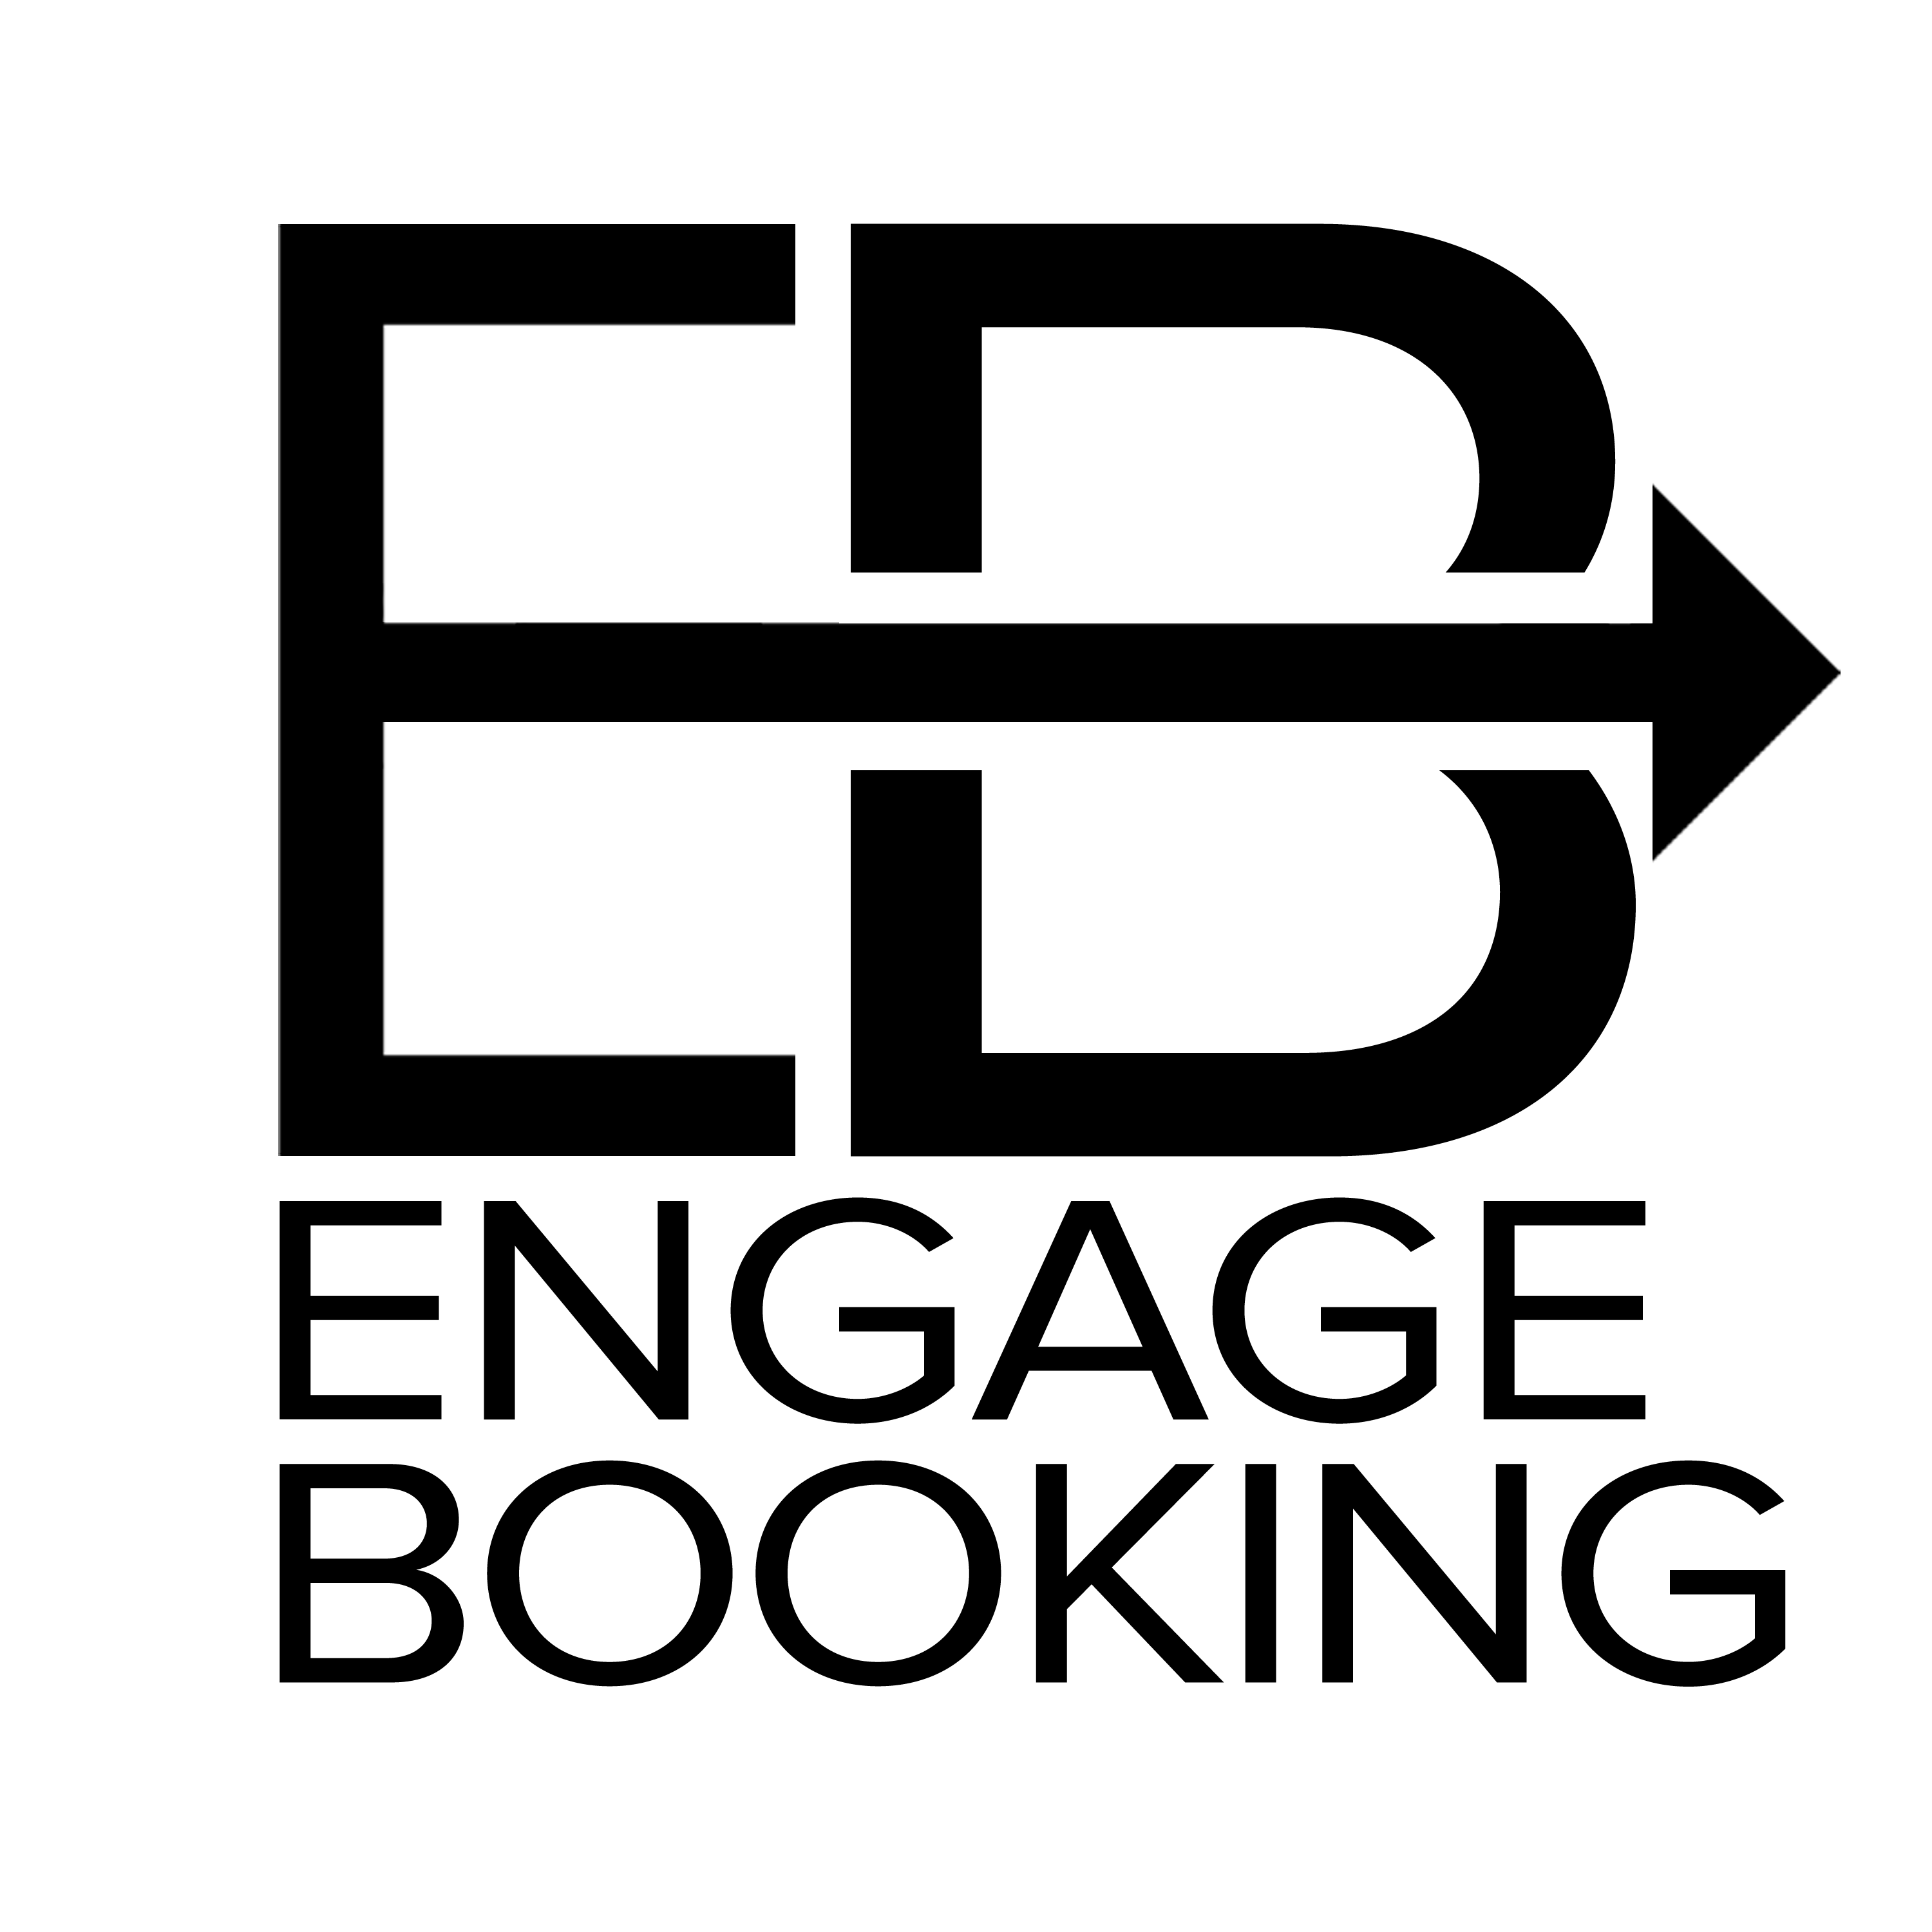 ENGAGE BOOKING